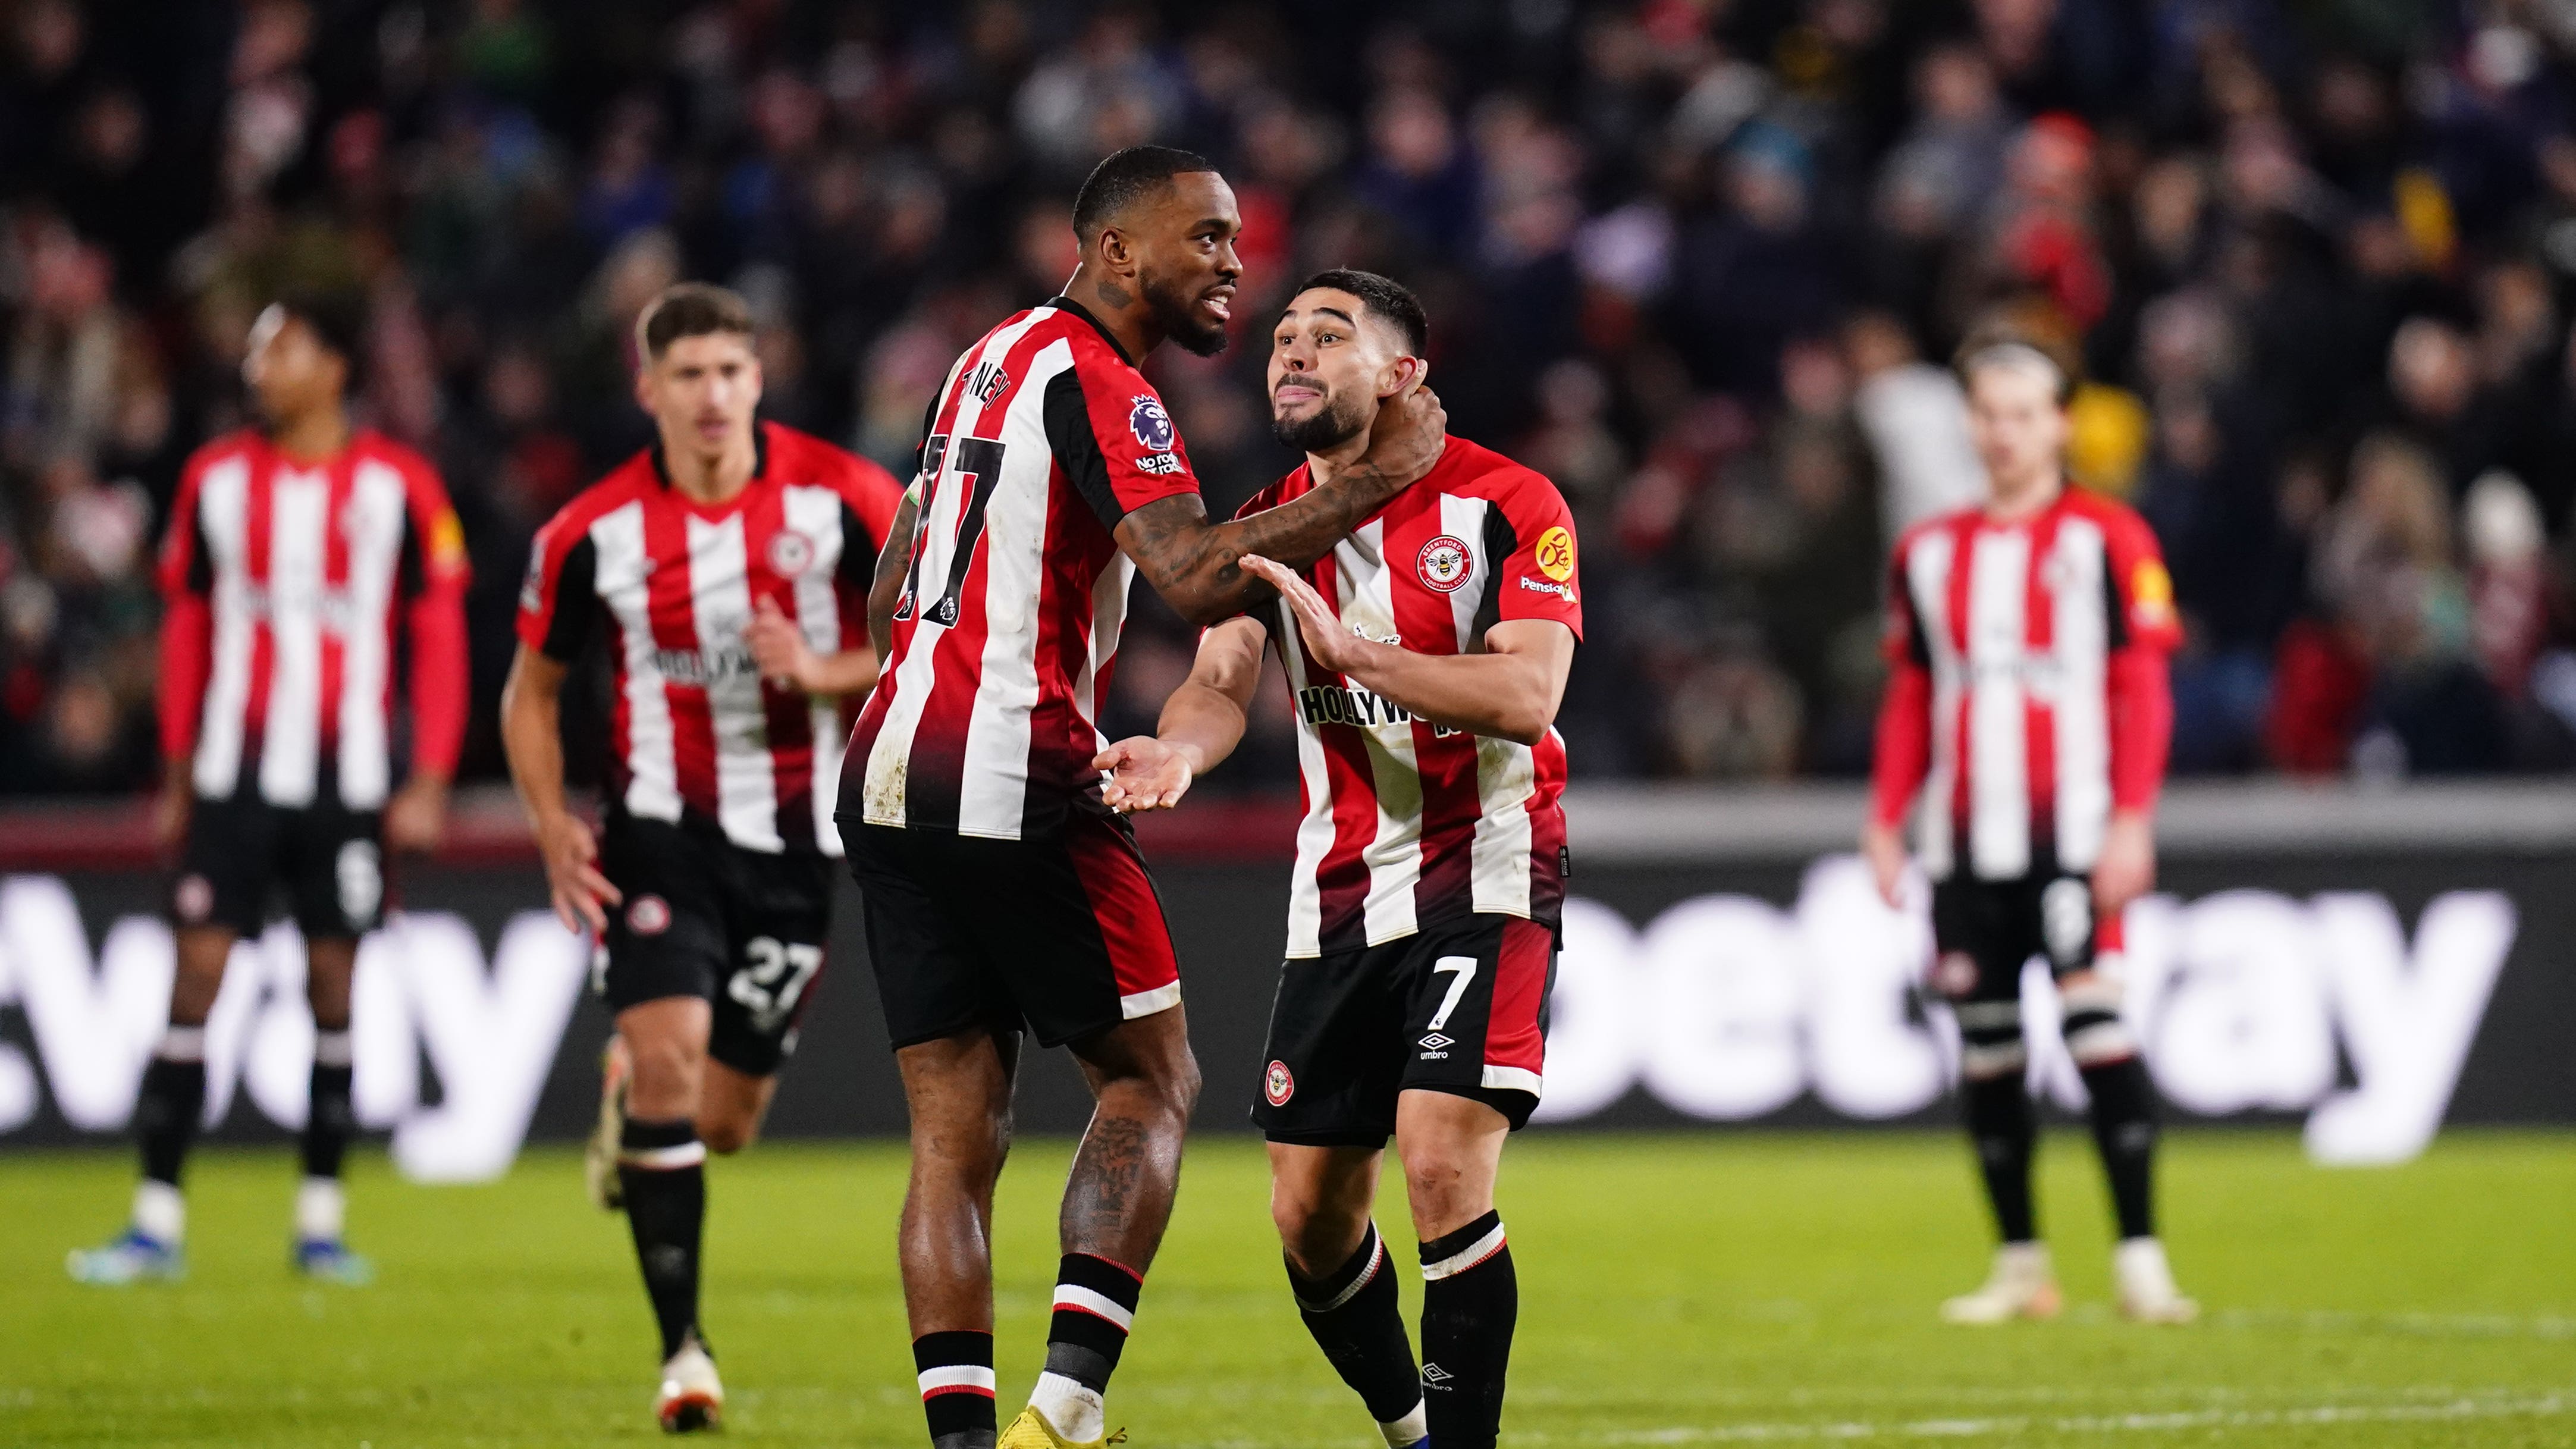 Neal Maupay earns manager’s praise as strike partner Ivan Toney claims headlines